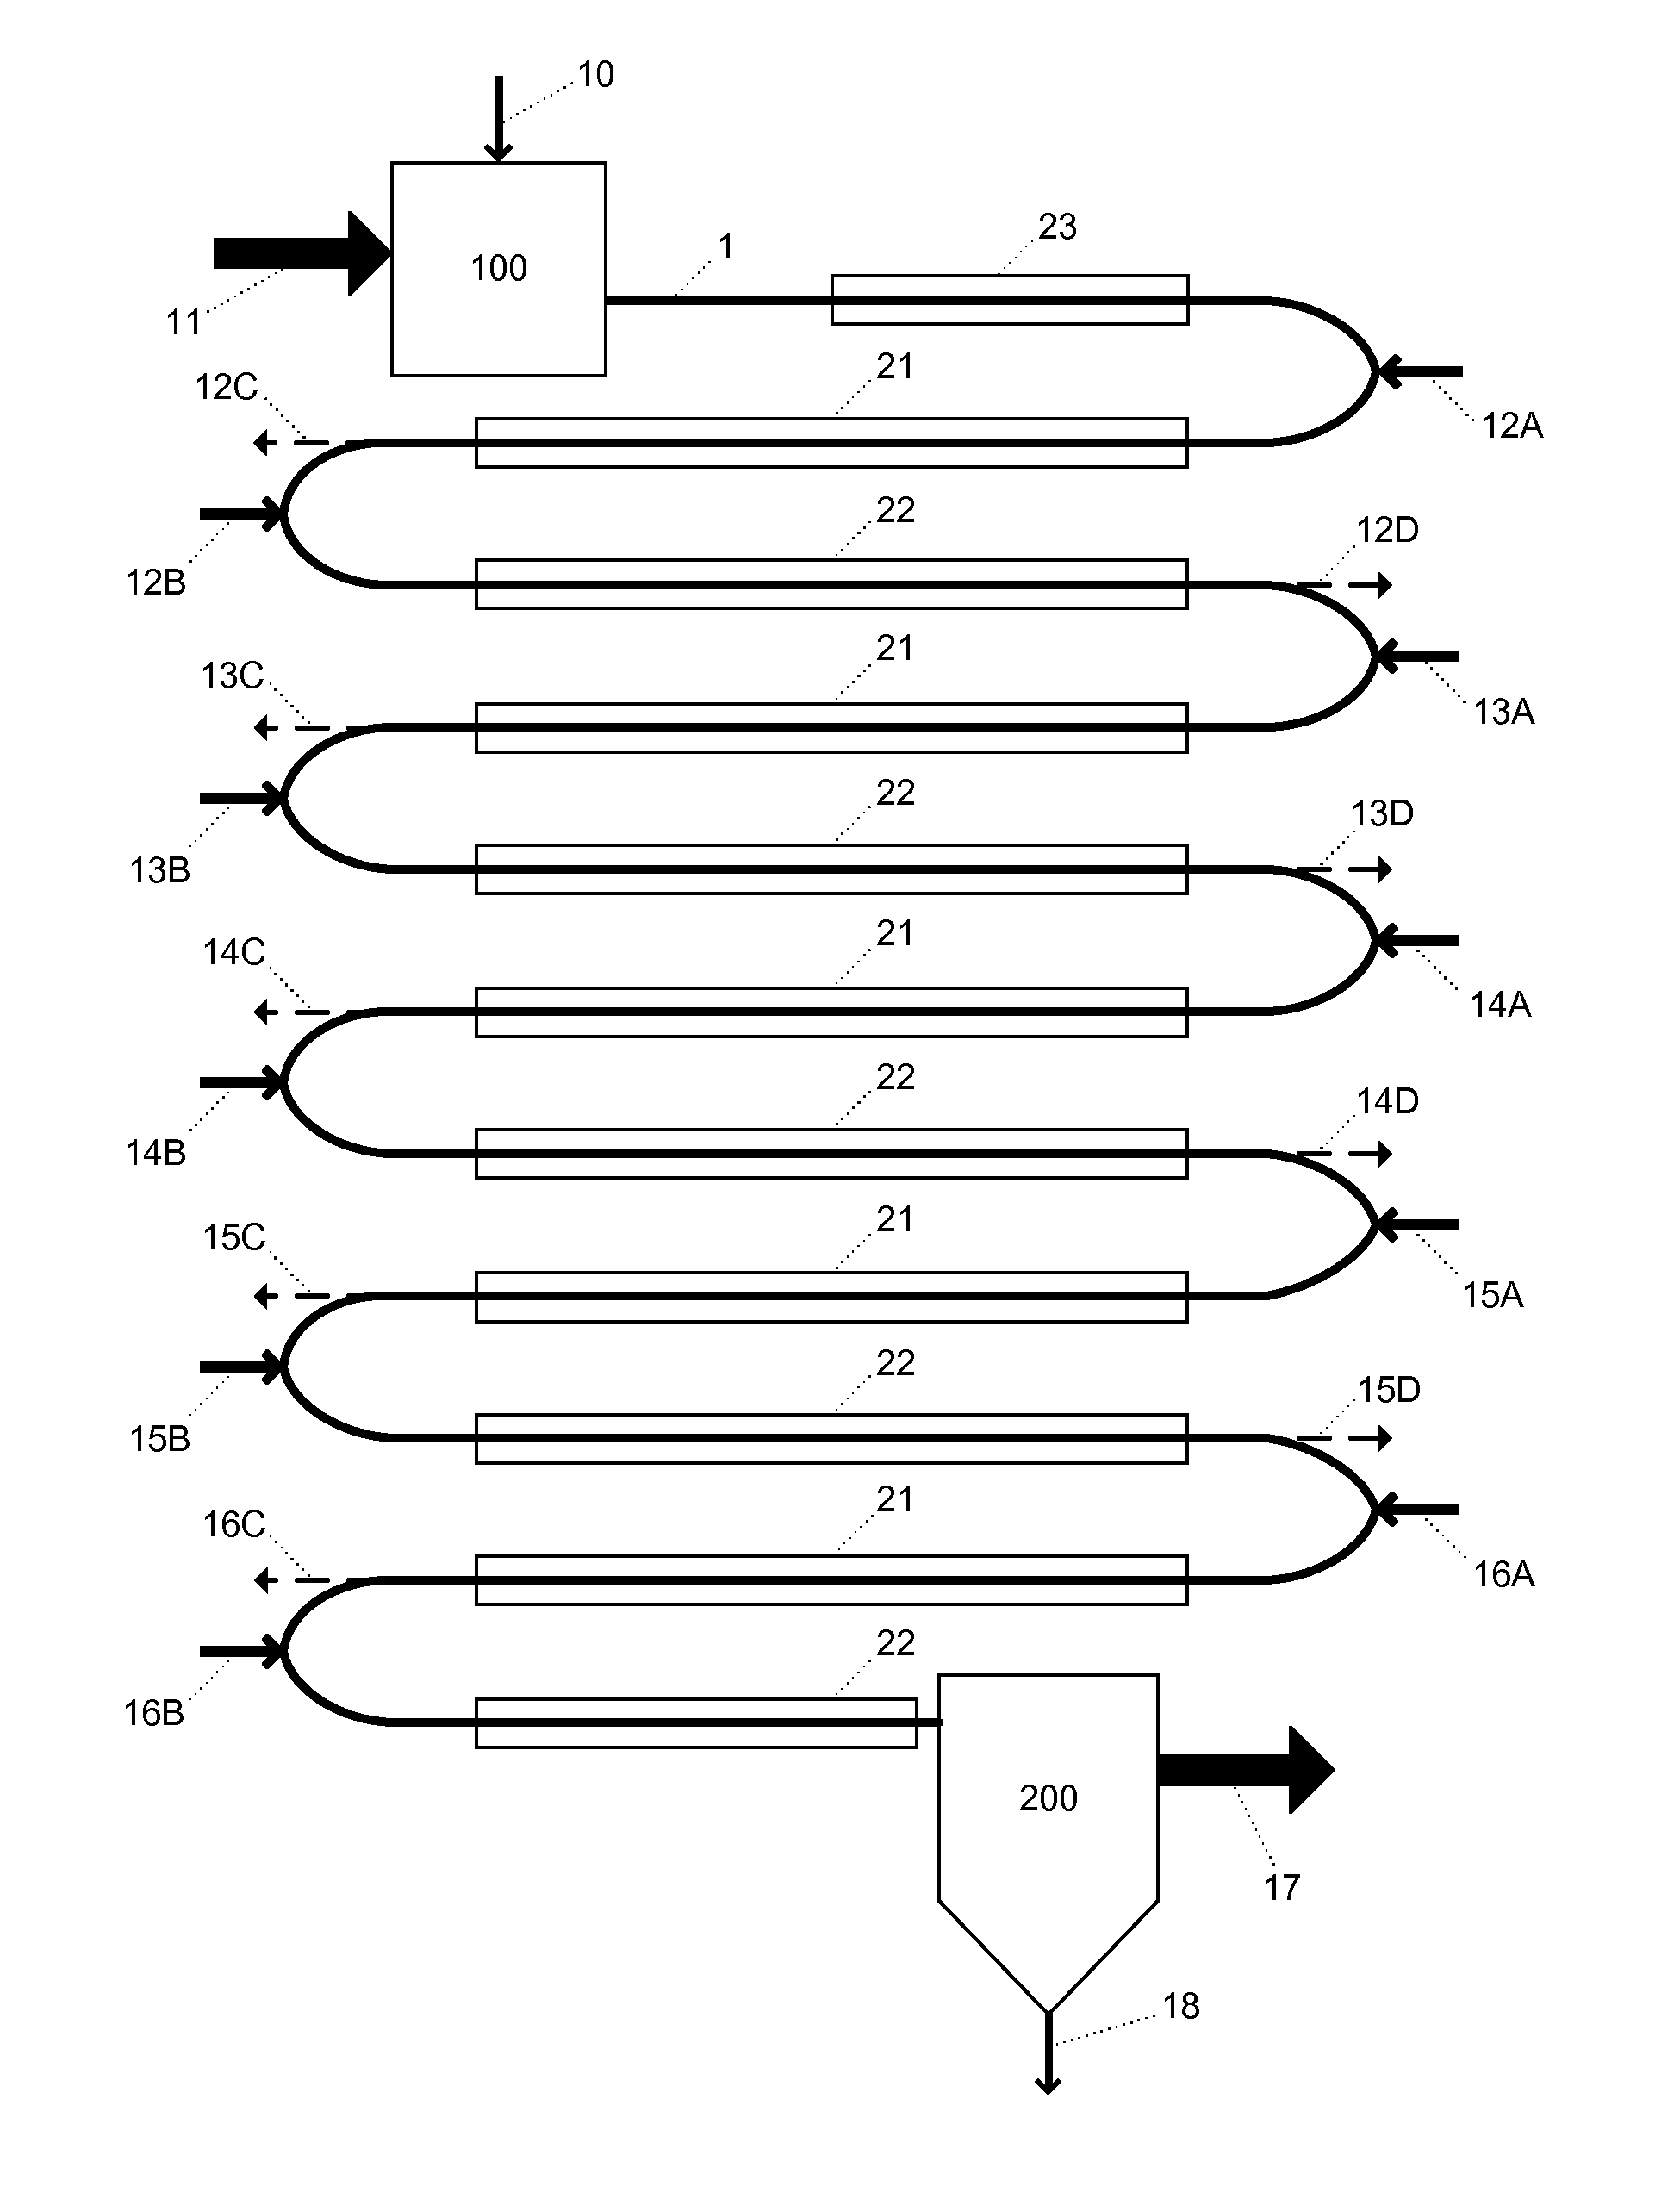 Apparatus and process for atomic or molecular layer deposition onto particles during pneumatic transport